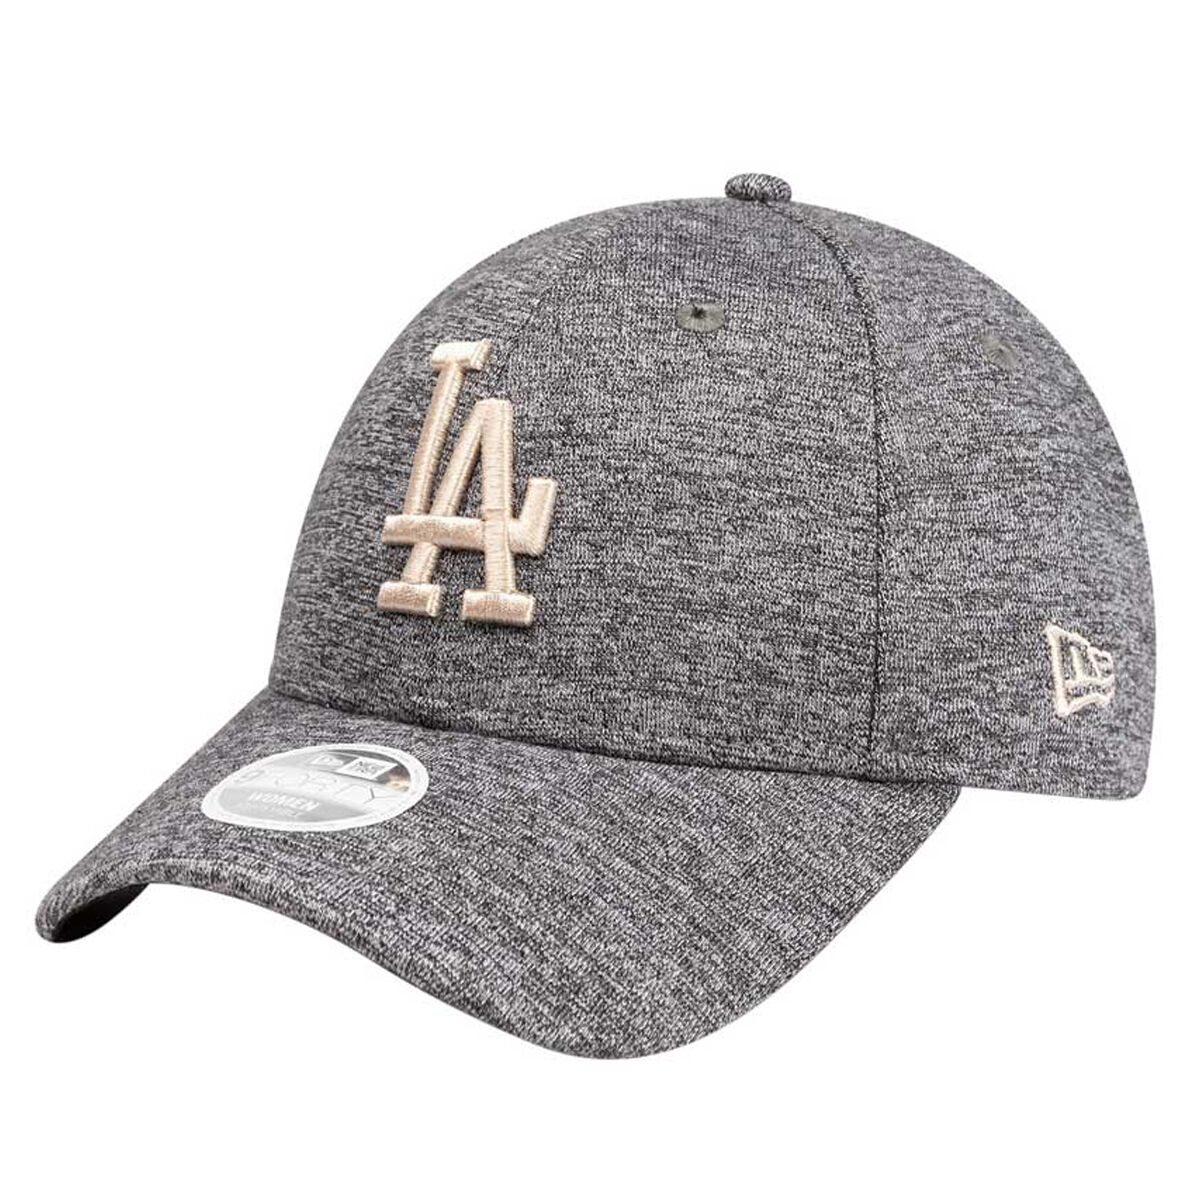 New Era MLB Los Angeles Angels 9FORTY Cap - Red - Womens